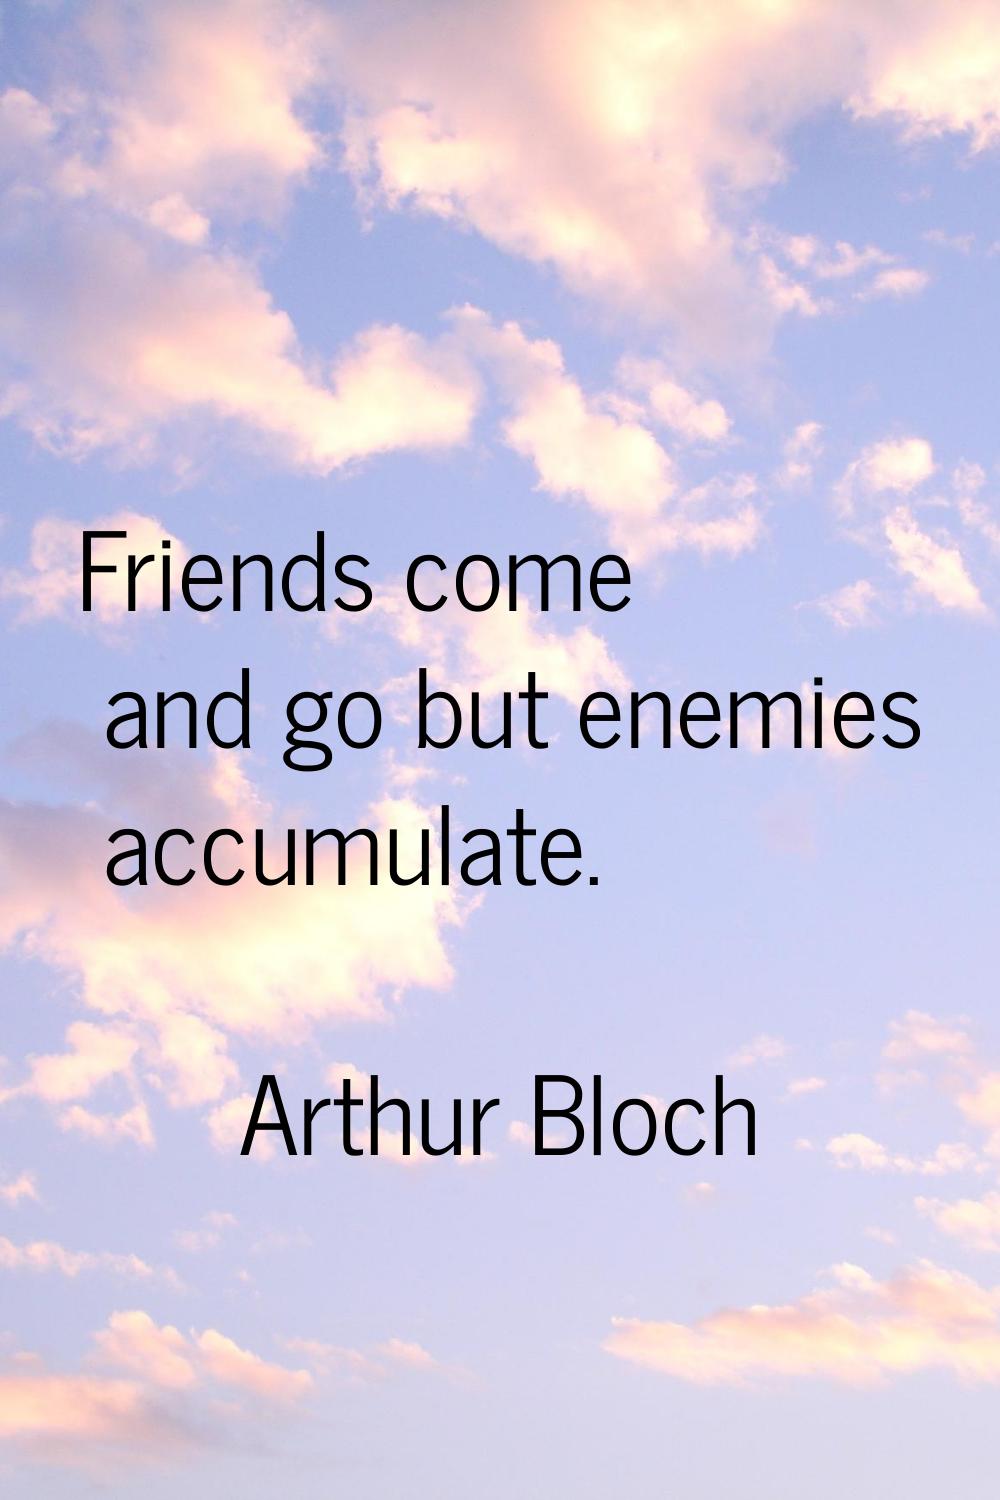 Friends come and go but enemies accumulate.